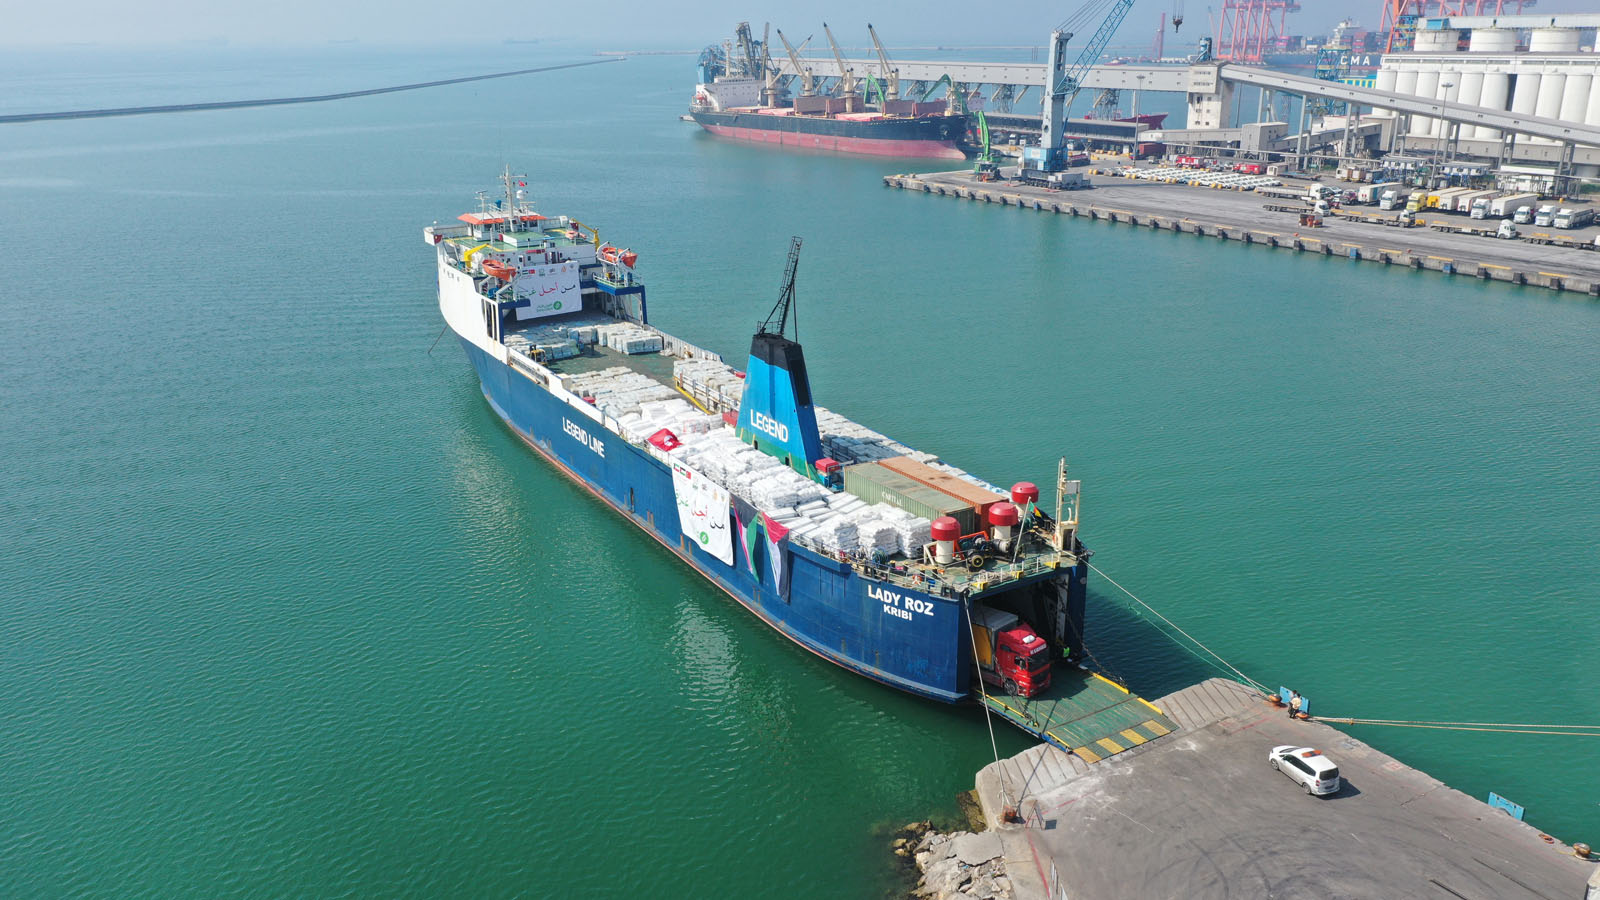 IHH and Kuwait Society for Relief send aid ship to Gaza